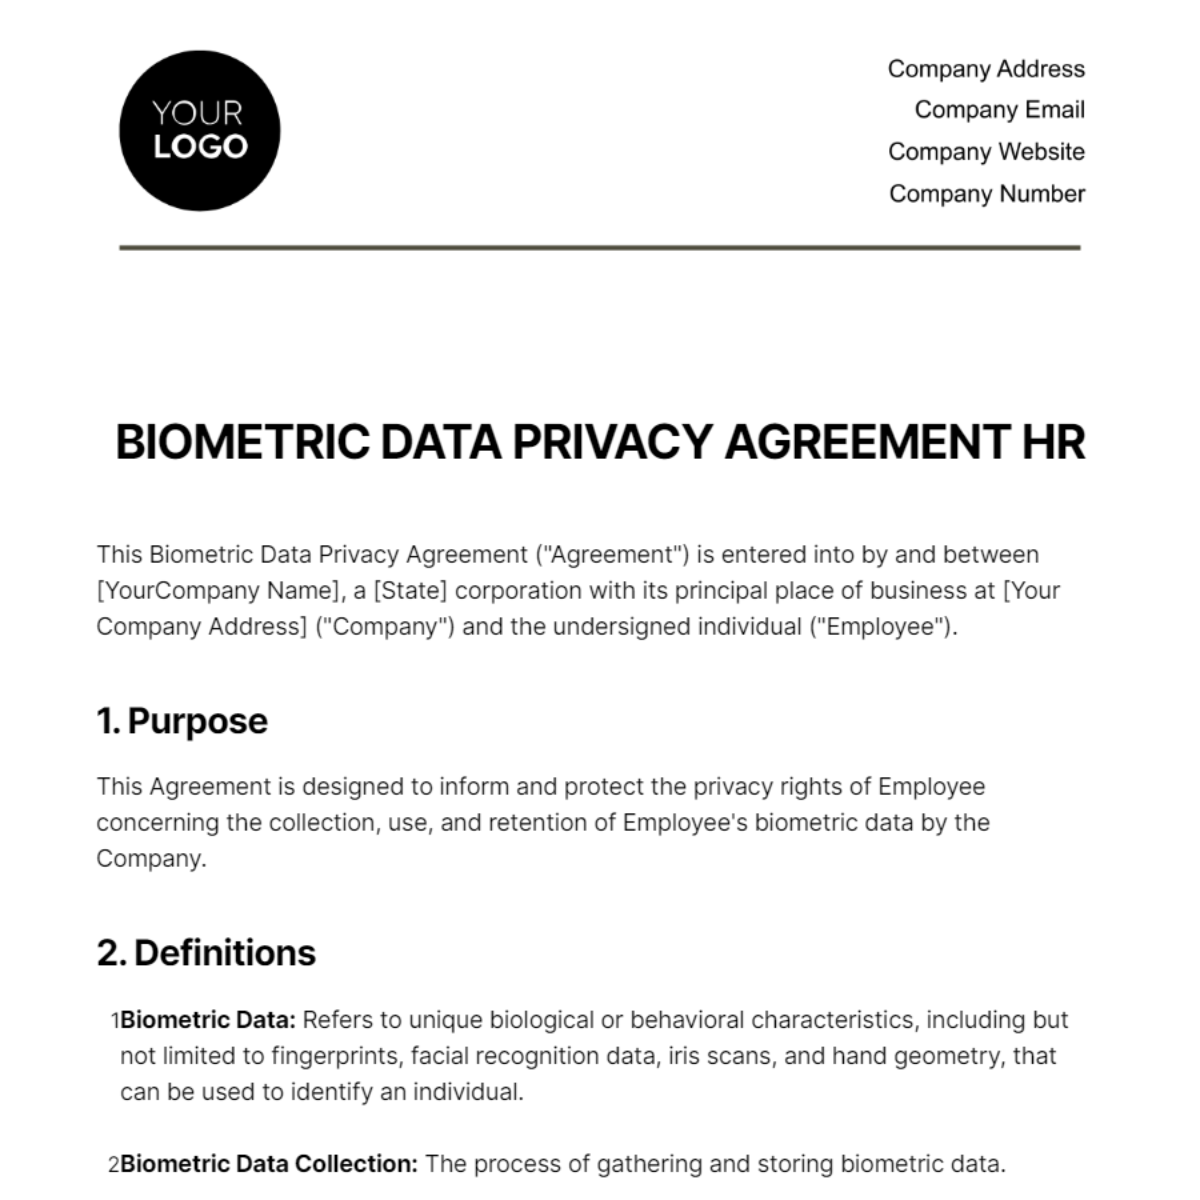 Biometric Data Privacy Agreement HR Template